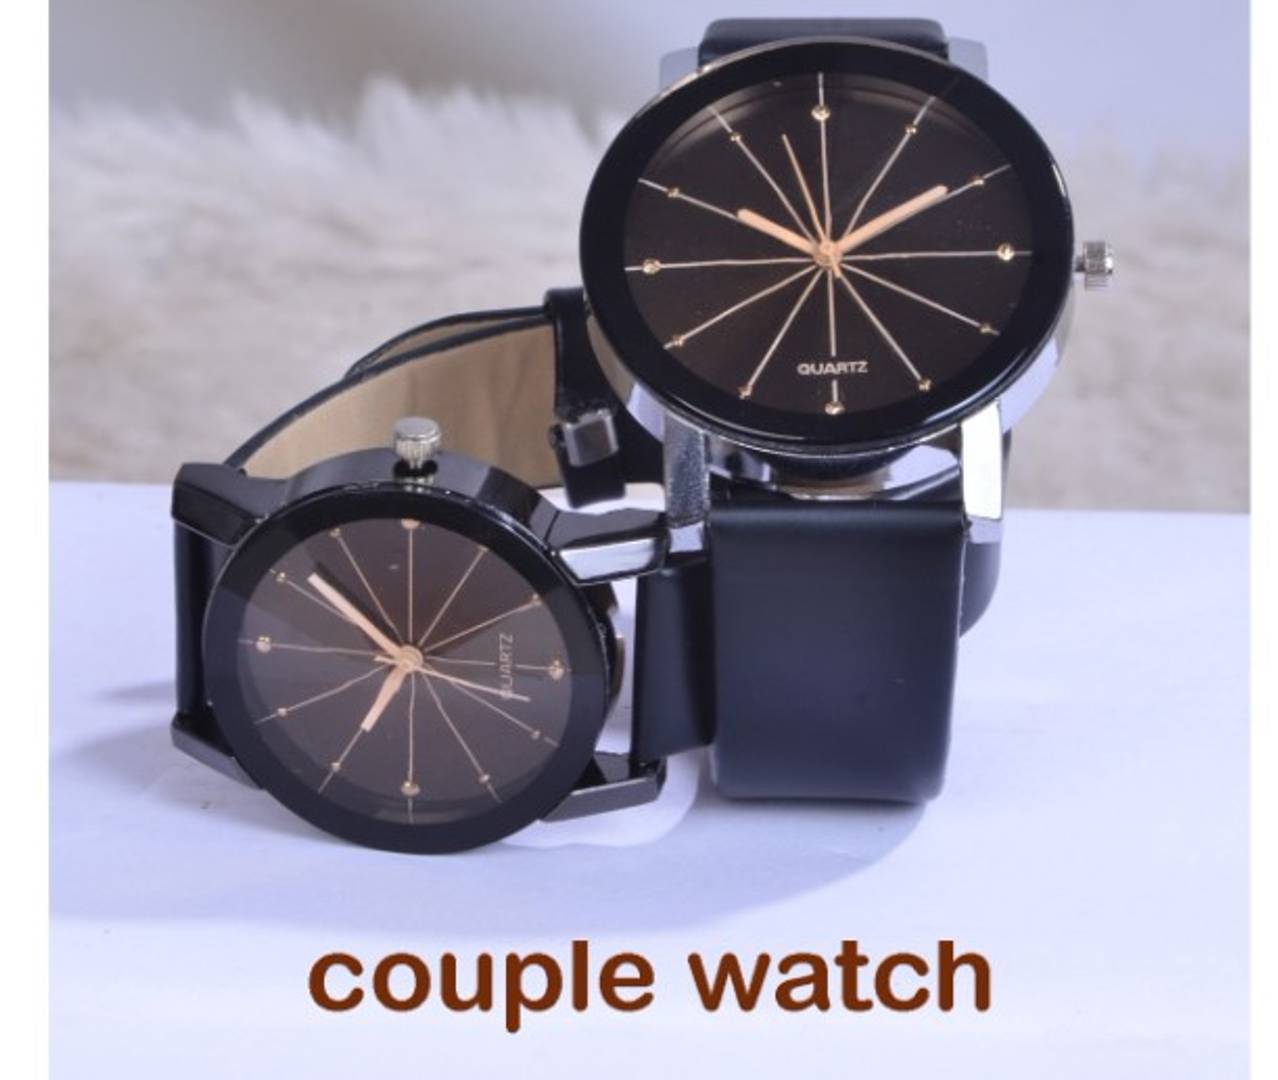 Stylish and Trendy Synthetic Strap Analog Watch for Couples